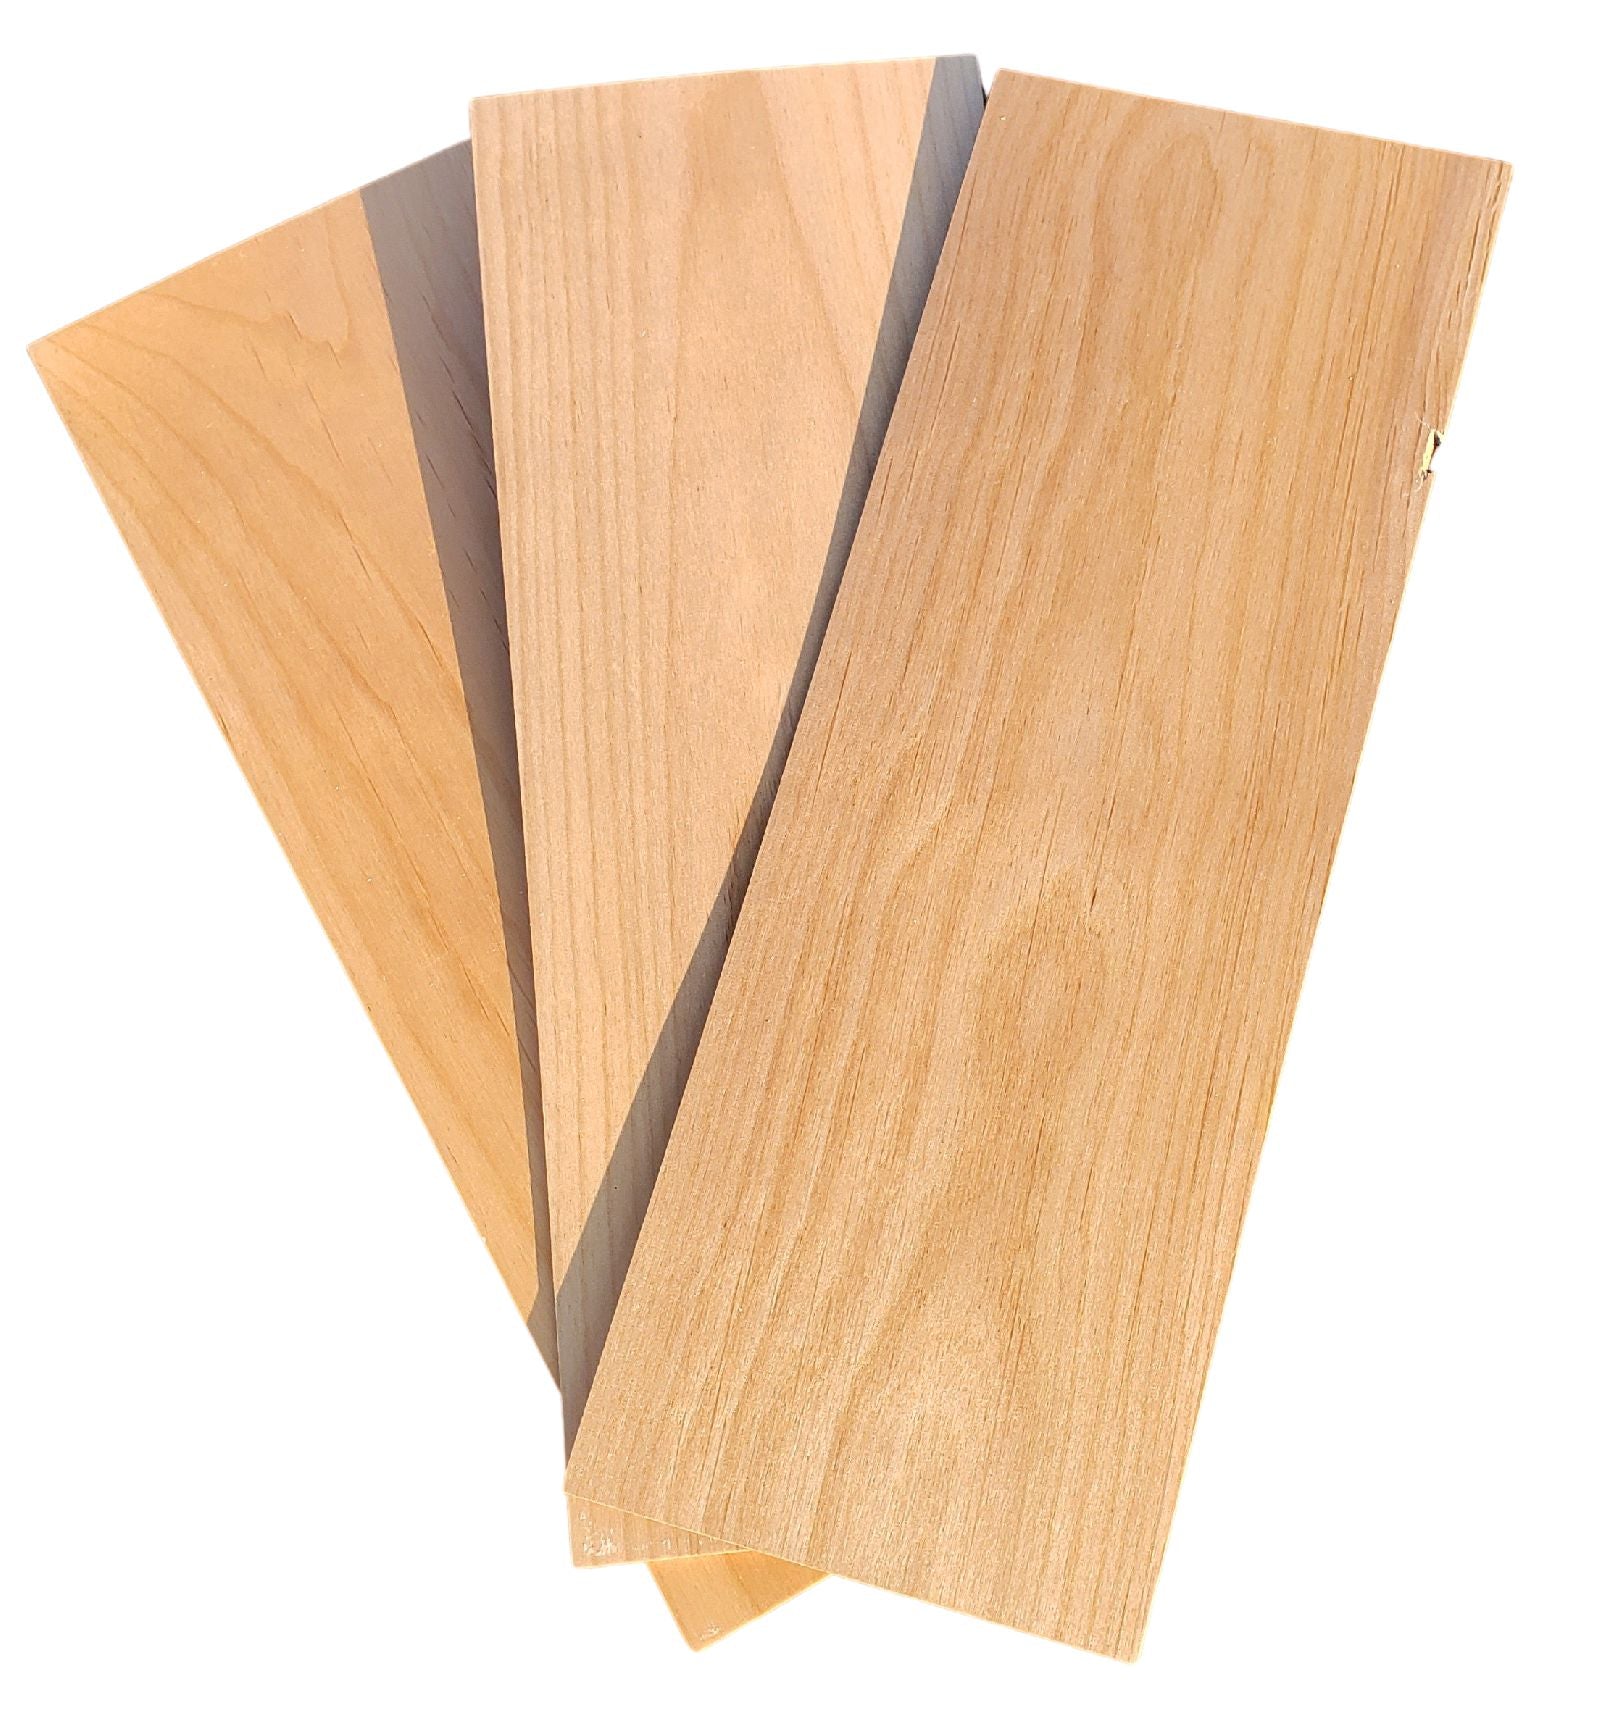 Alder Wood Strips, 1/4" thick 6" x 18" Pack of 12